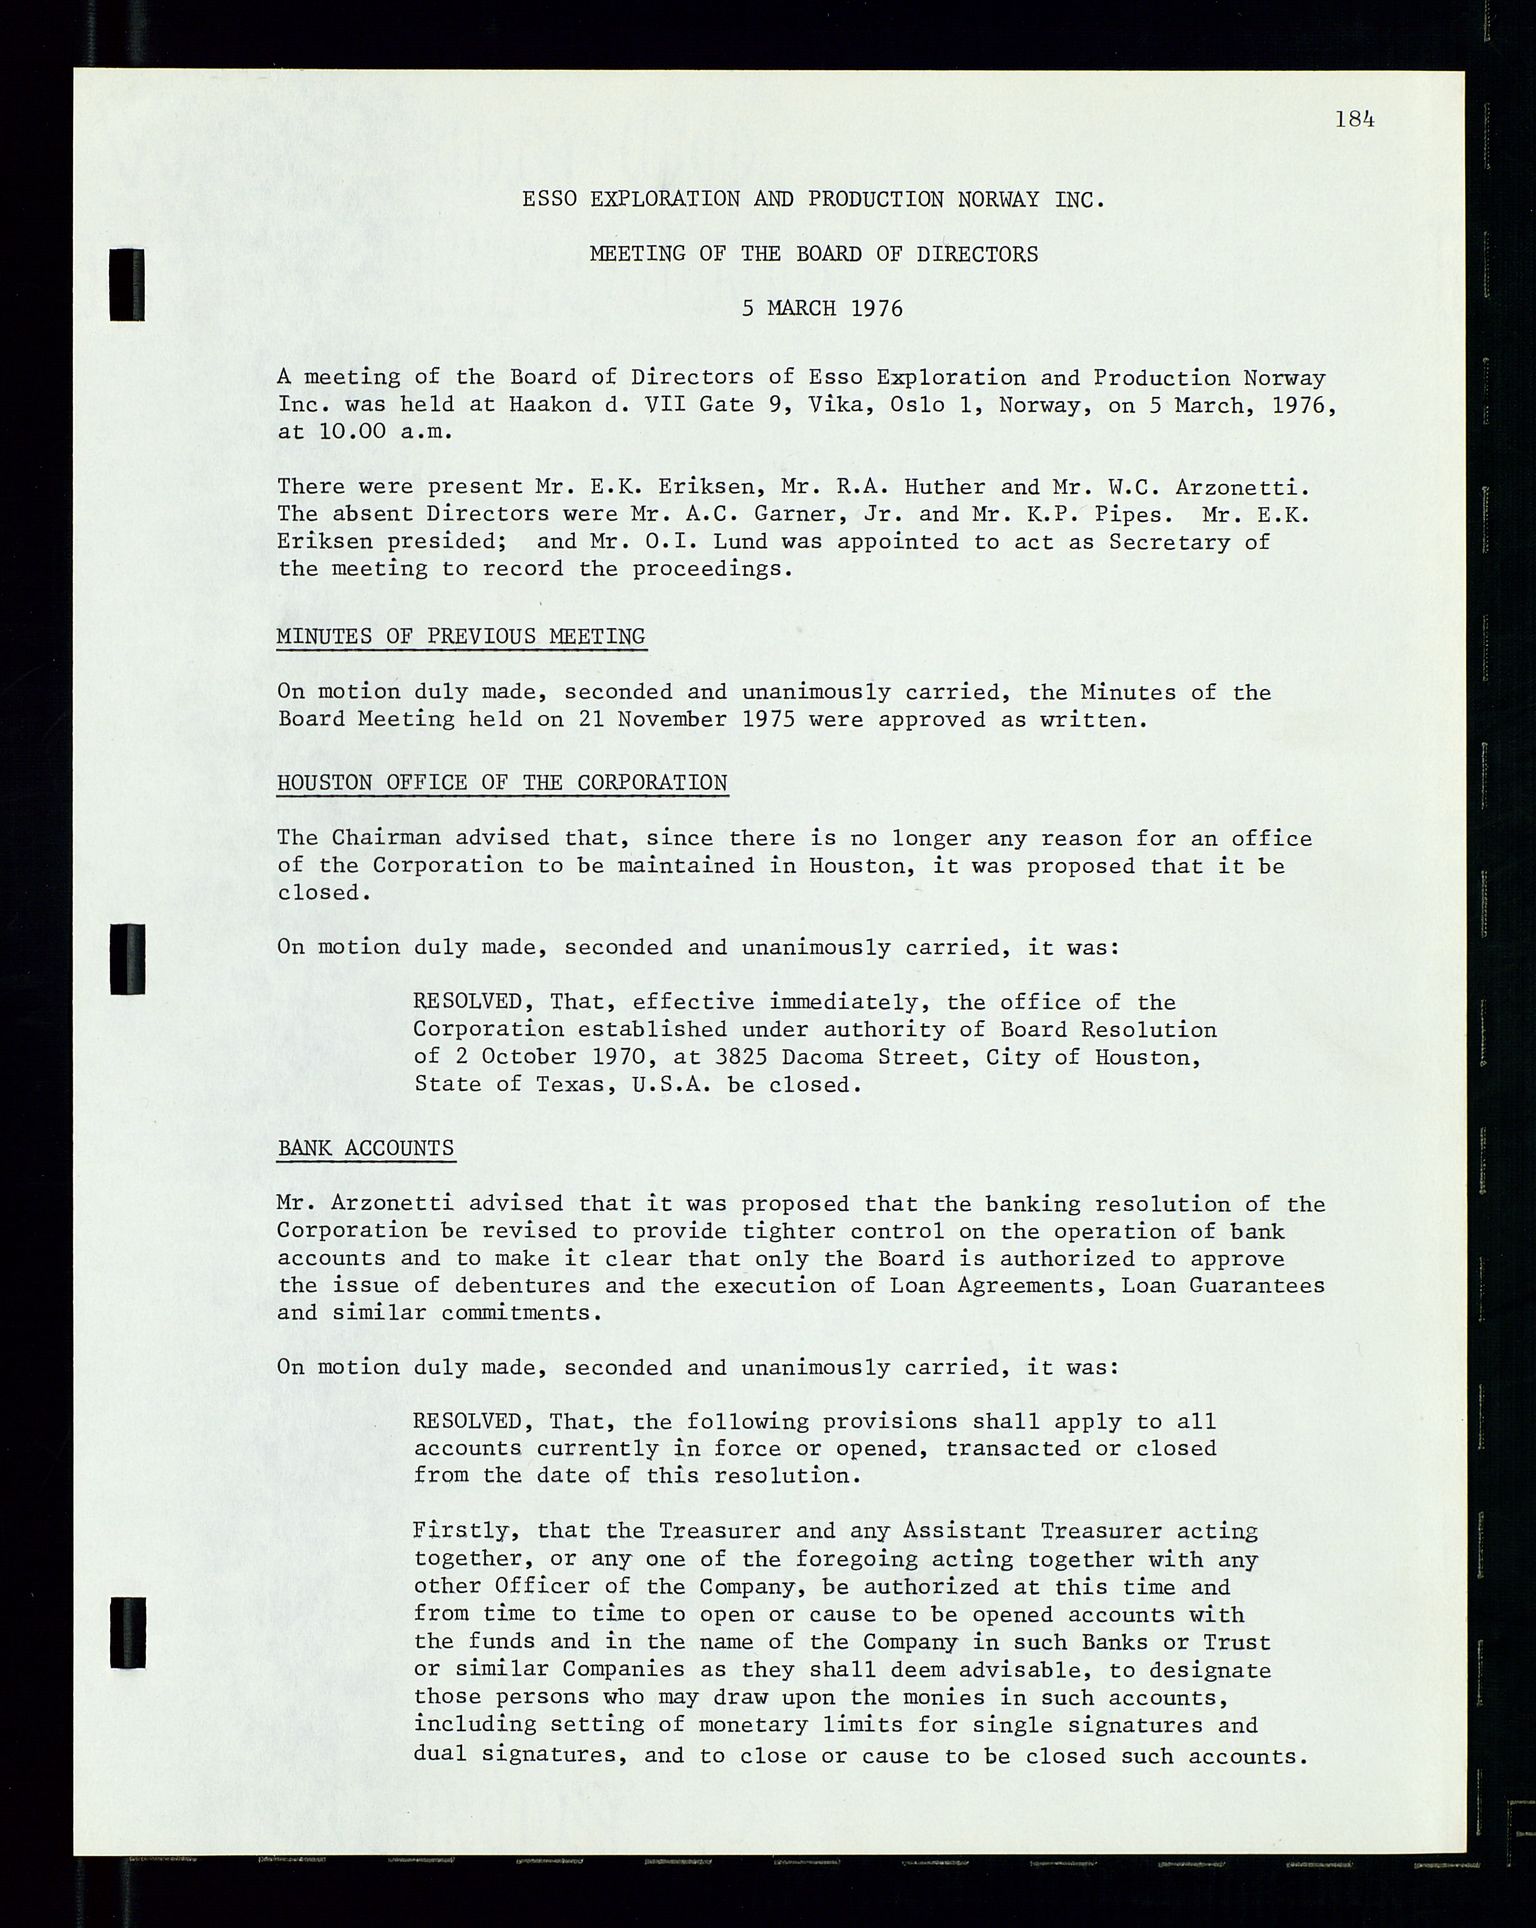 Pa 1512 - Esso Exploration and Production Norway Inc., SAST/A-101917/A/Aa/L0001/0002: Styredokumenter / Corporate records, Board meeting minutes, Agreements, Stocholder meetings, 1975-1979, p. 25